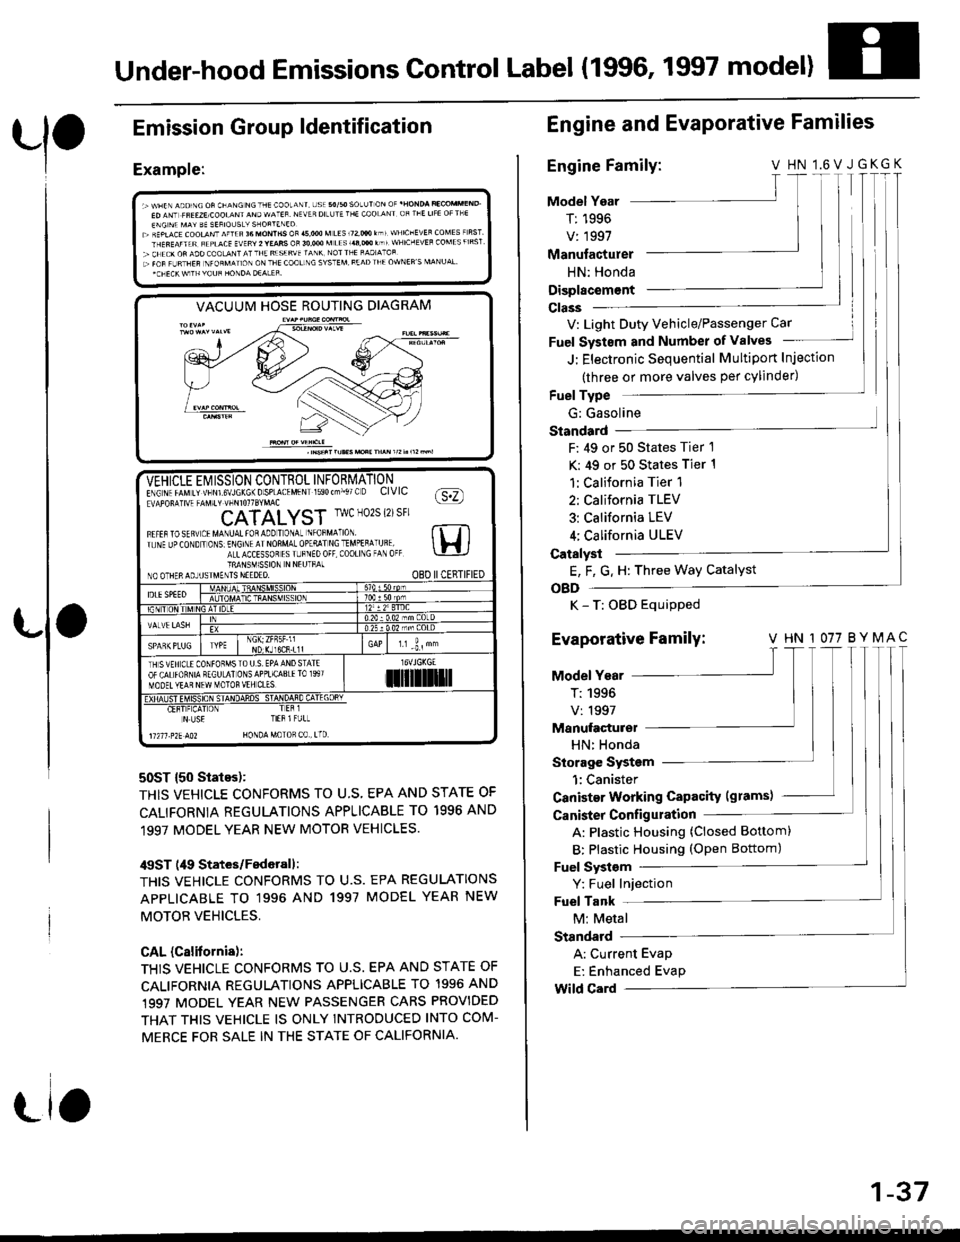 HONDA CIVIC 2000 6.G Owners Guide Under-hood Emissions Control Label (1996, 1997 model)
Emission
Example:
Group ldentification
VACUUM HOSE ROUTING DIAGRAM
50ST {50 States):
THIS VEHICLE CONFORMS TO U.S, EPA AND STATE OF
CALIFORNIA REG